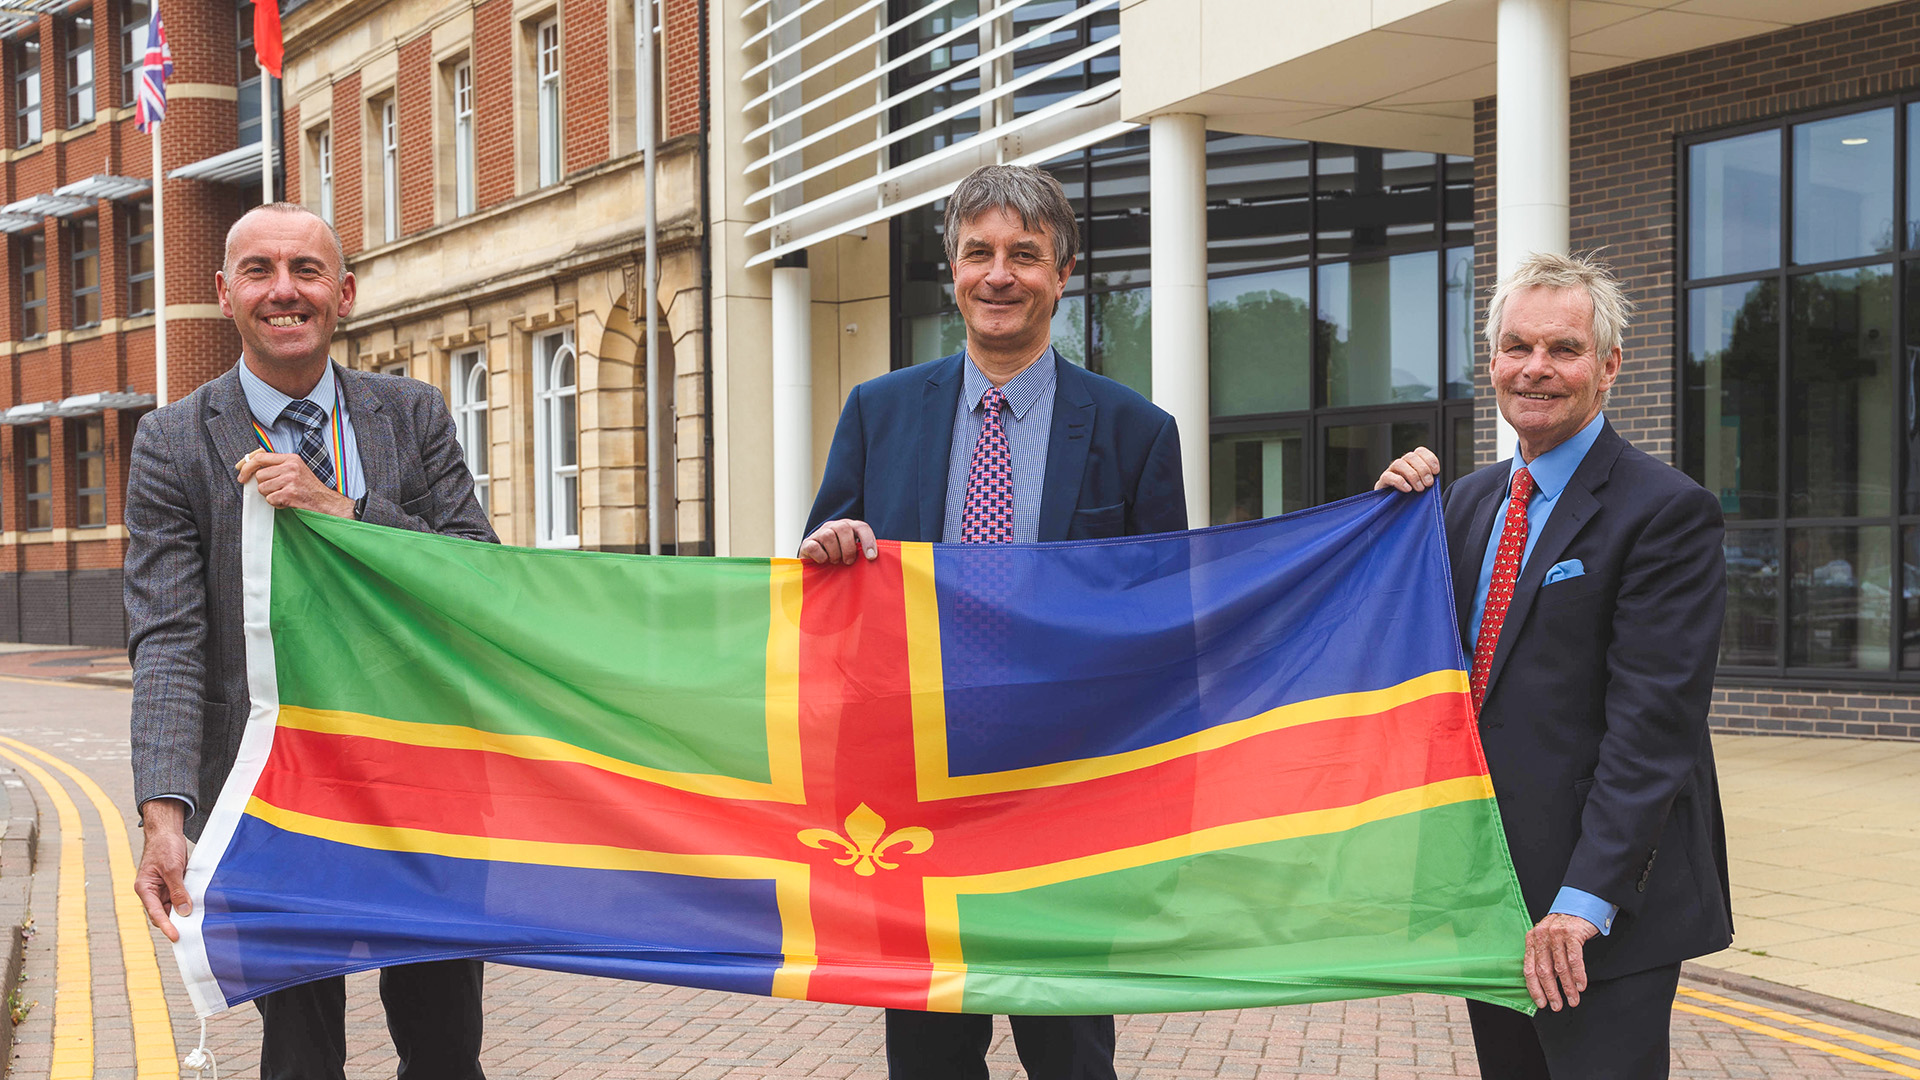 Council leaders with lincolnshire flag